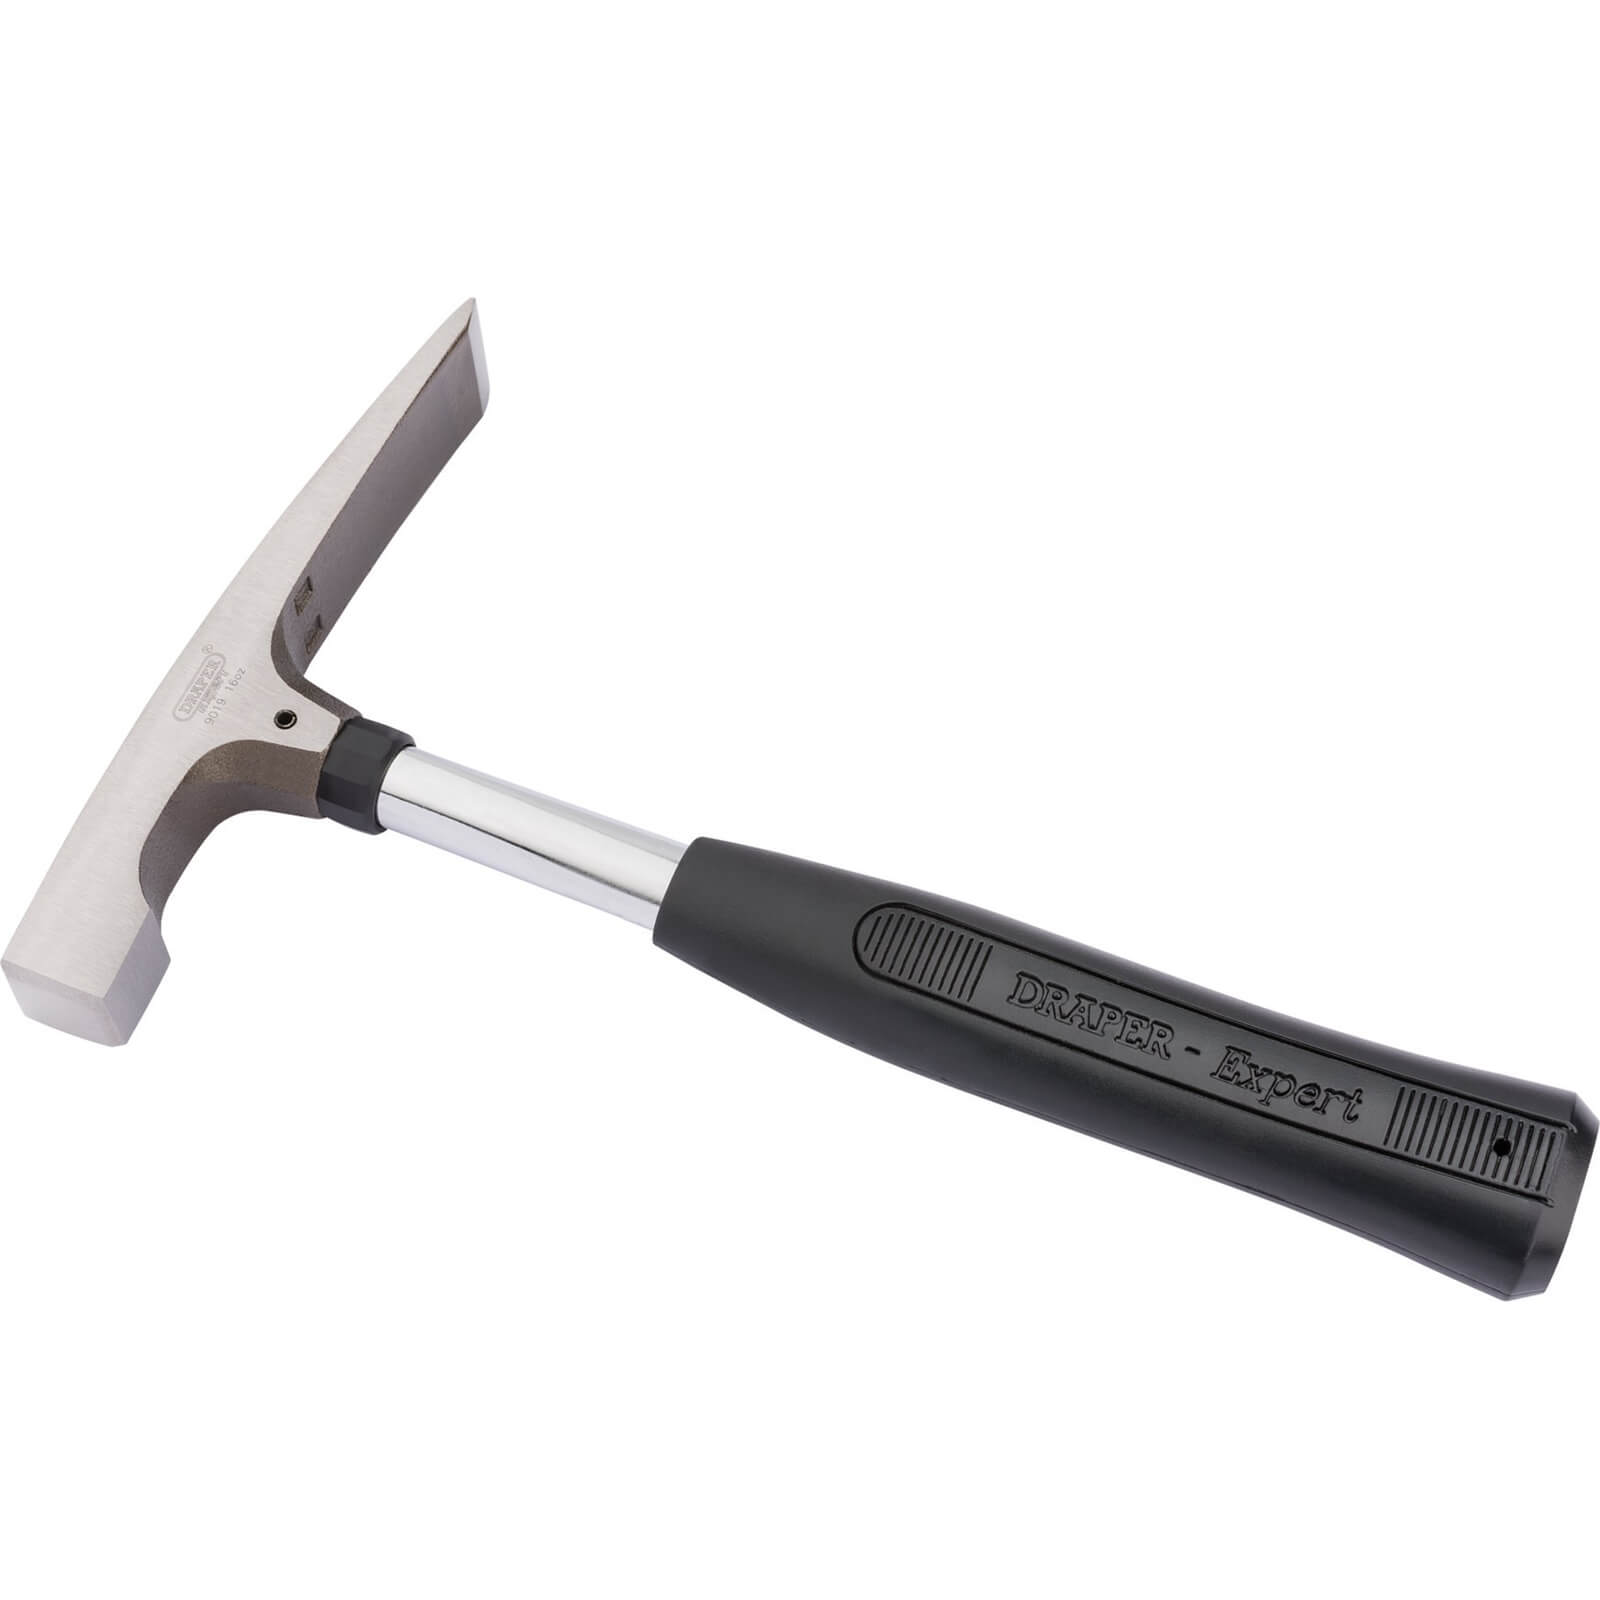 Image of Draper Expert Bricklayers Hammers 450g